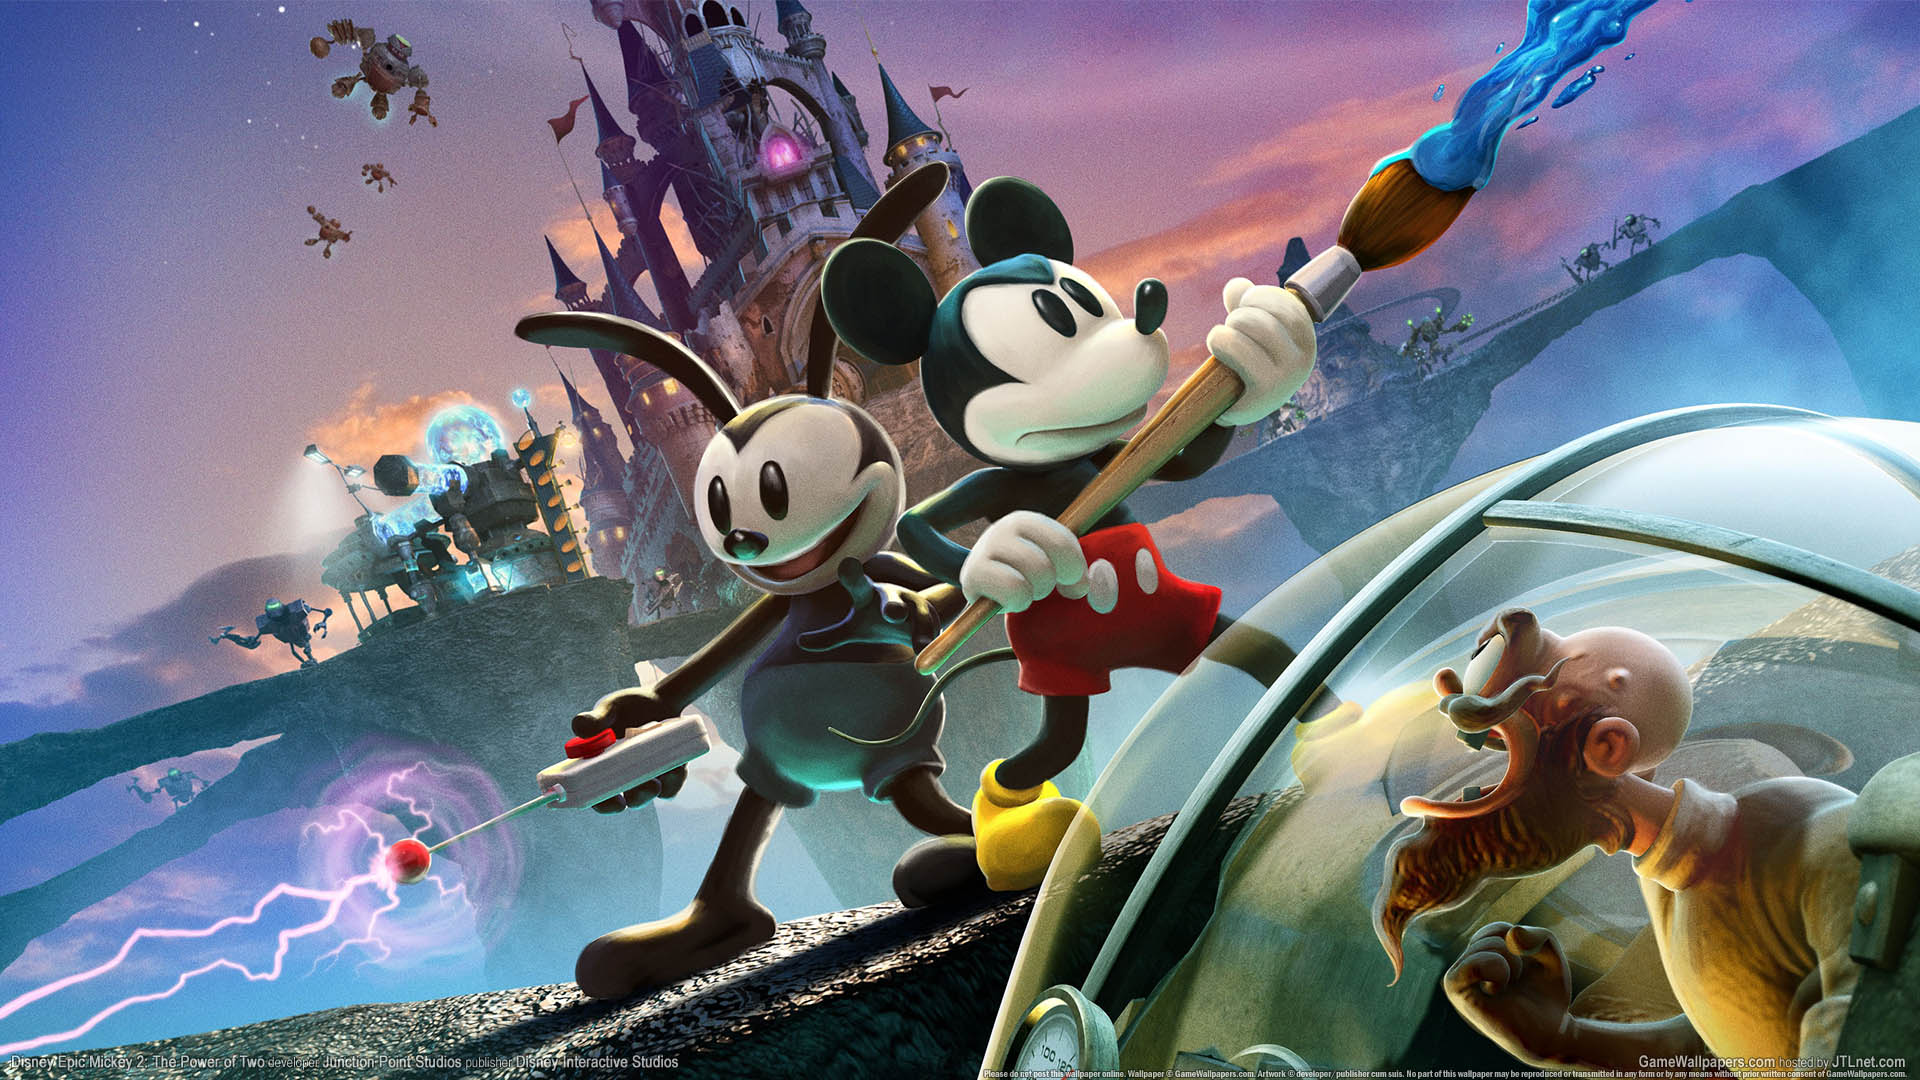 Disney Epic Mickey 2: The Power of Two fond d'cran 01 1920x1080